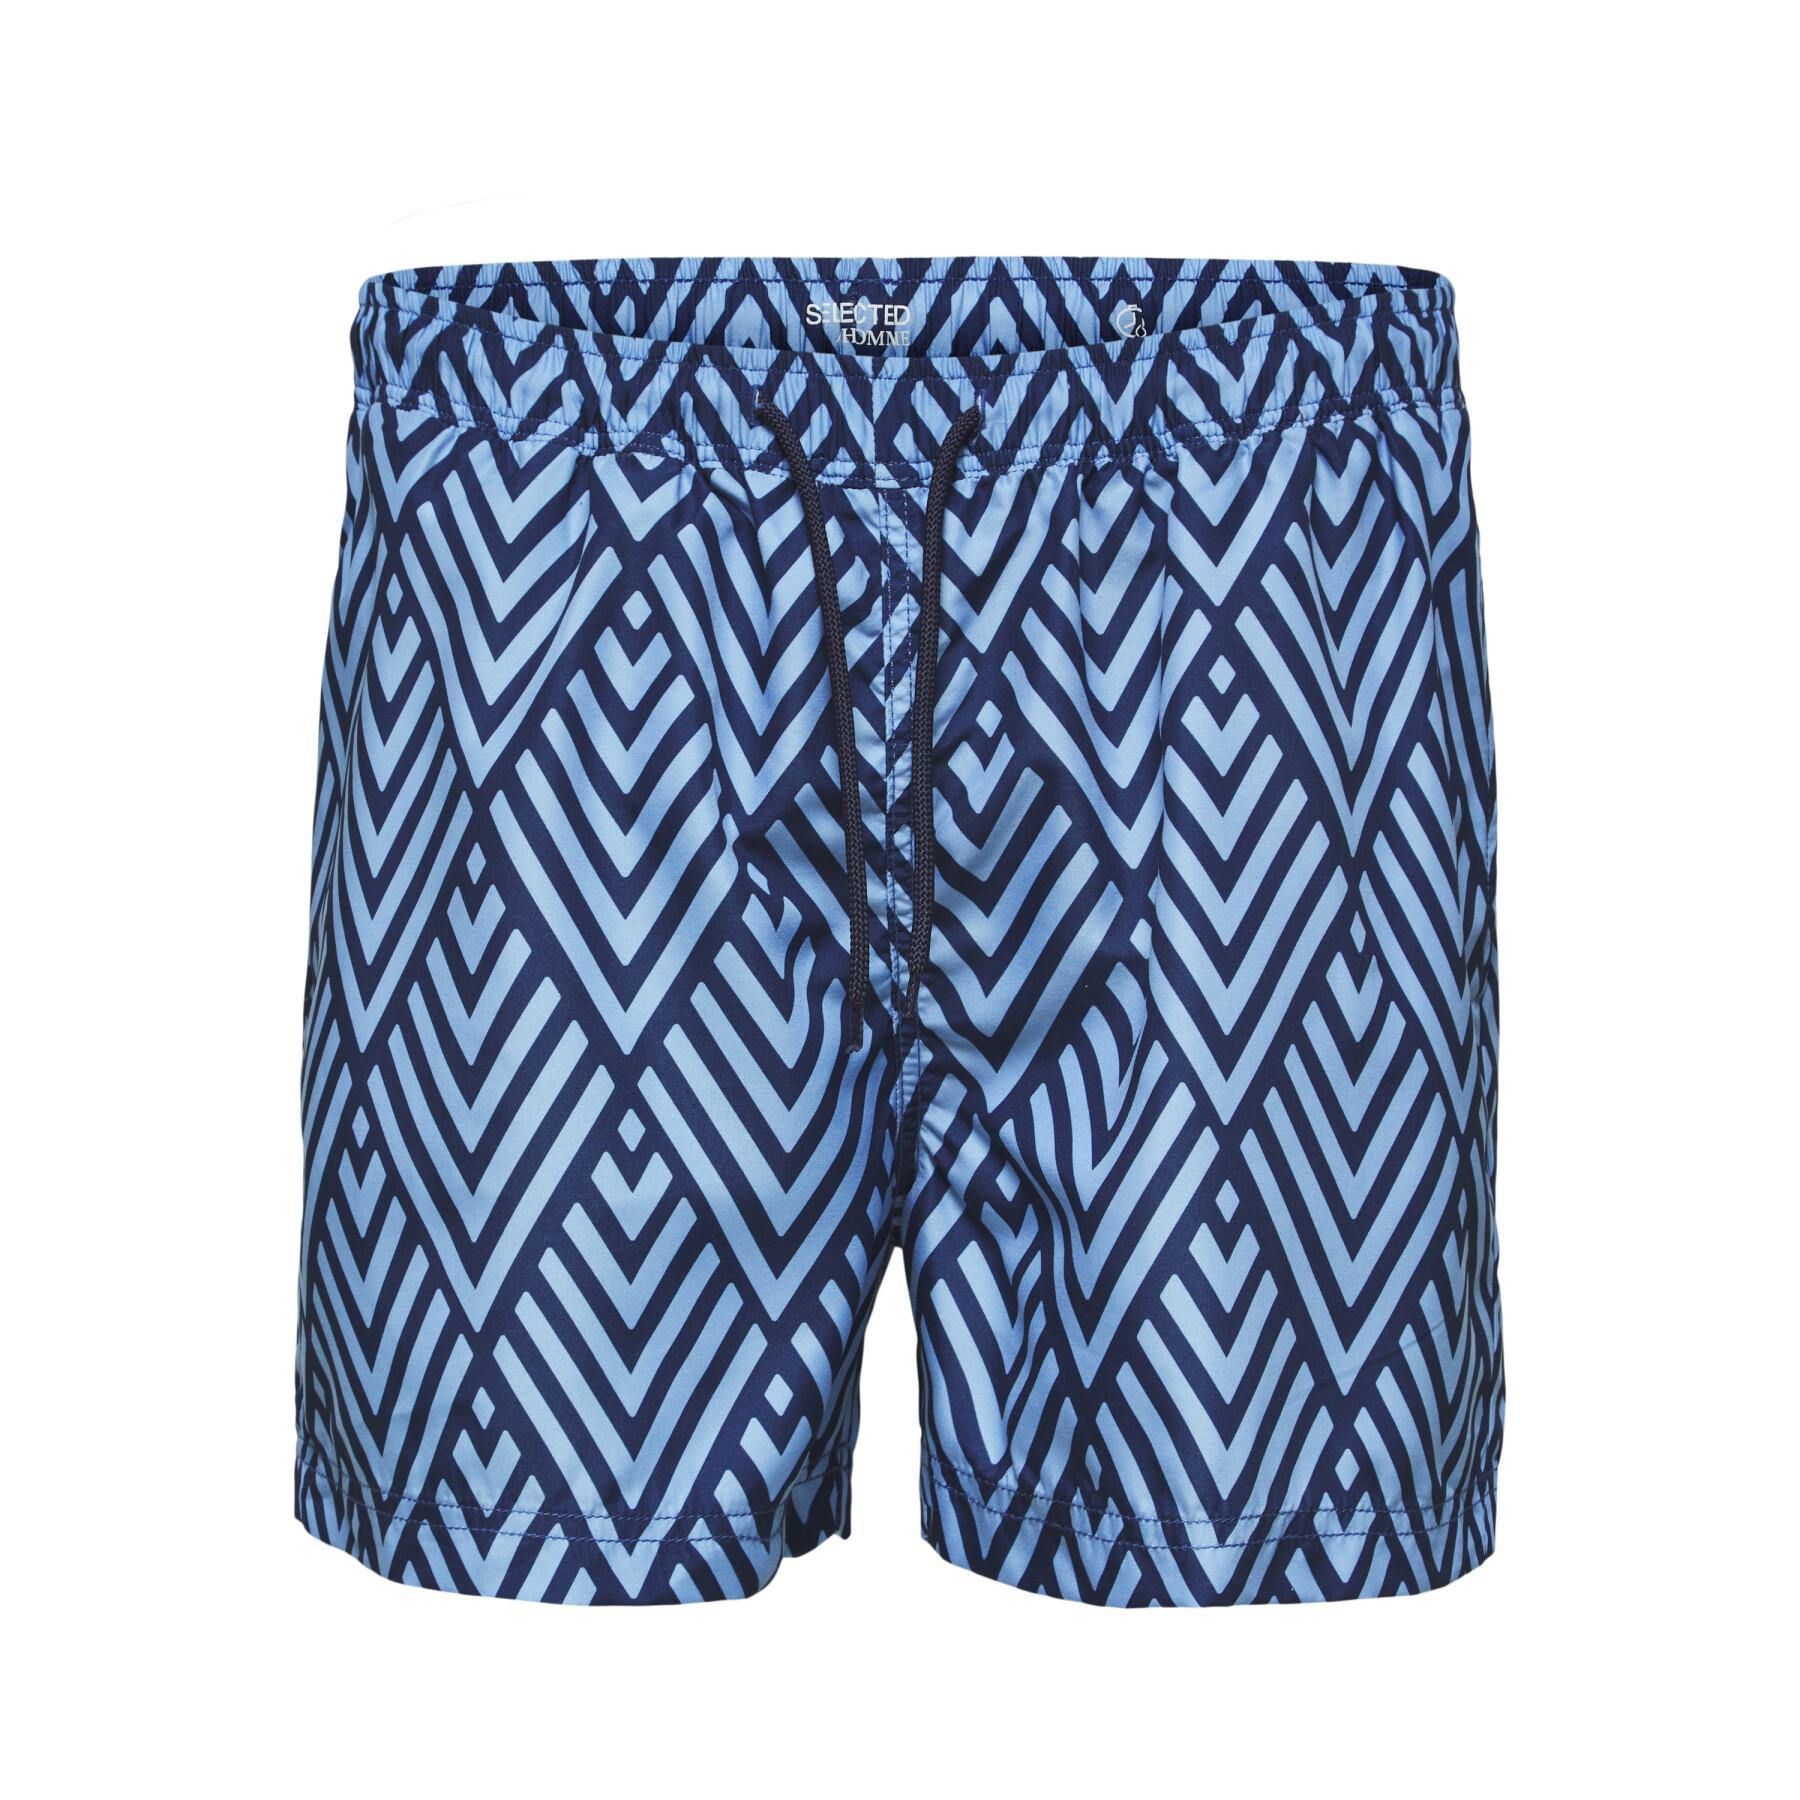 Curta Selected Slhclassic Aop Swimshorts